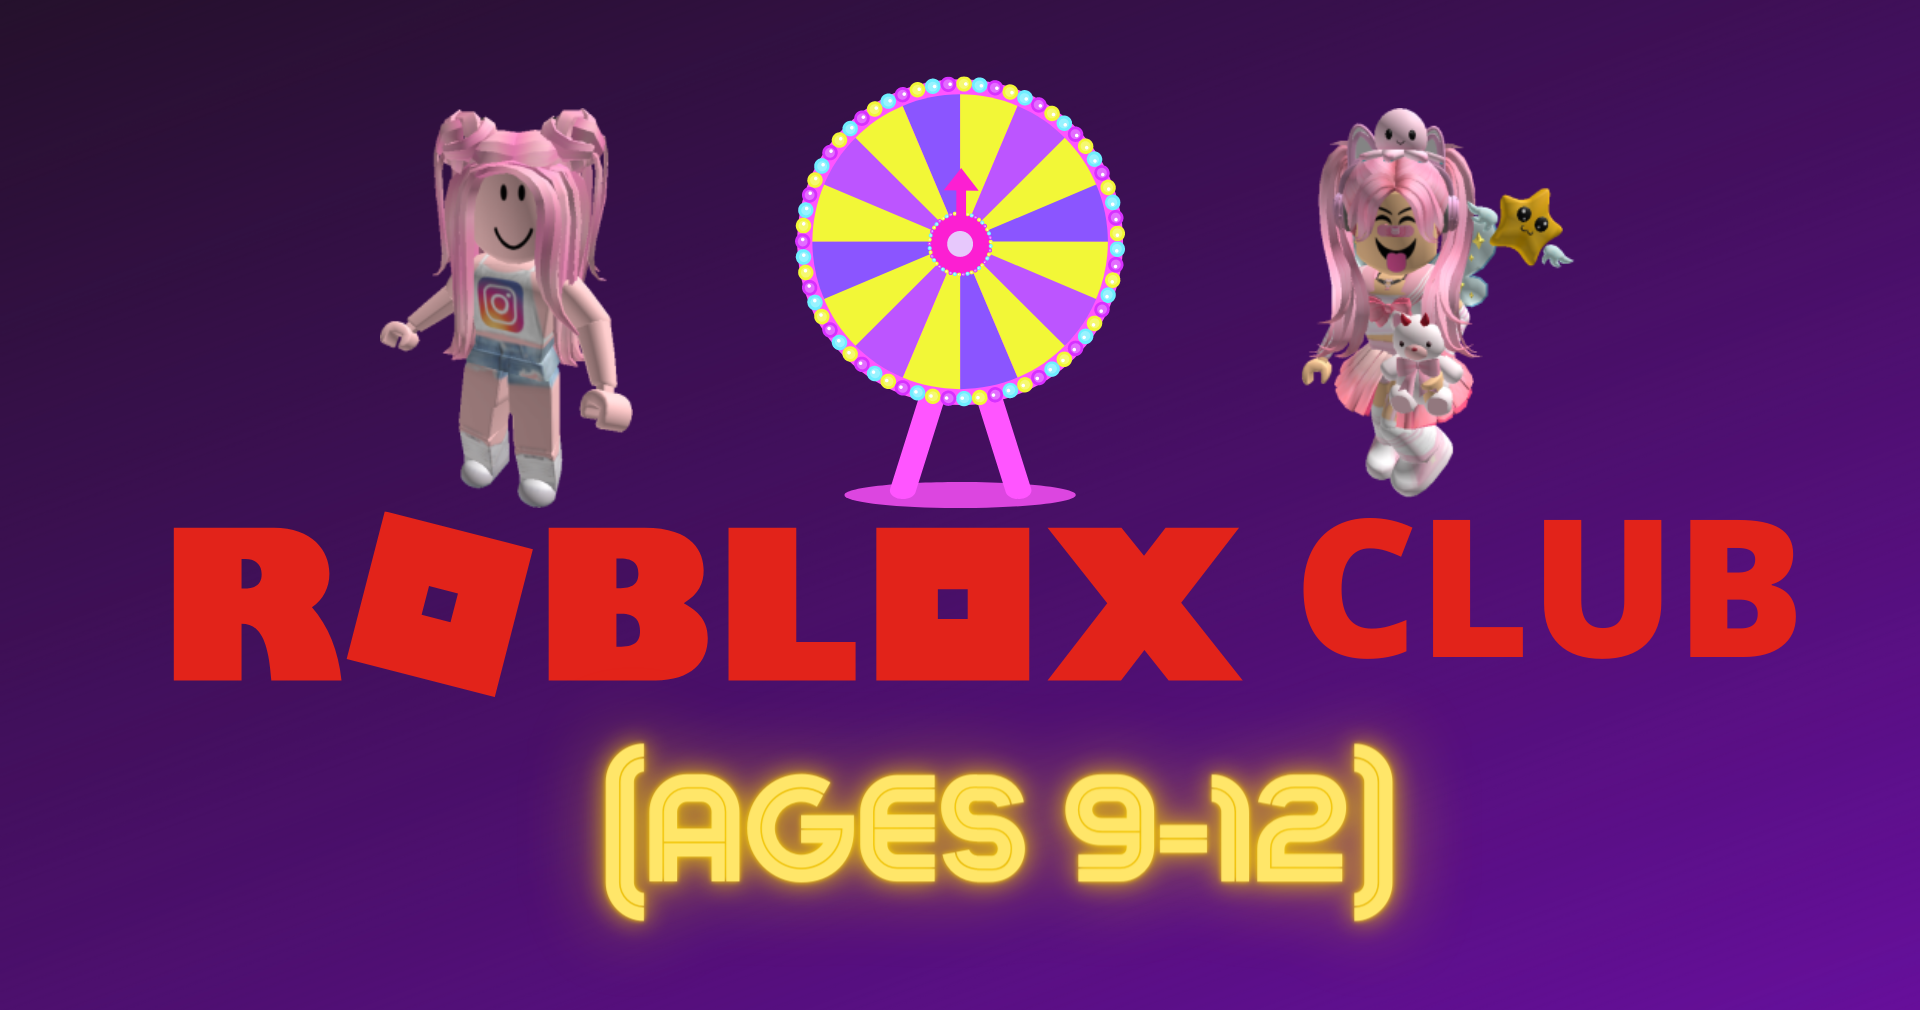 Gaming Club for Teens: Play Roblox & Socialize for Ages 13-18